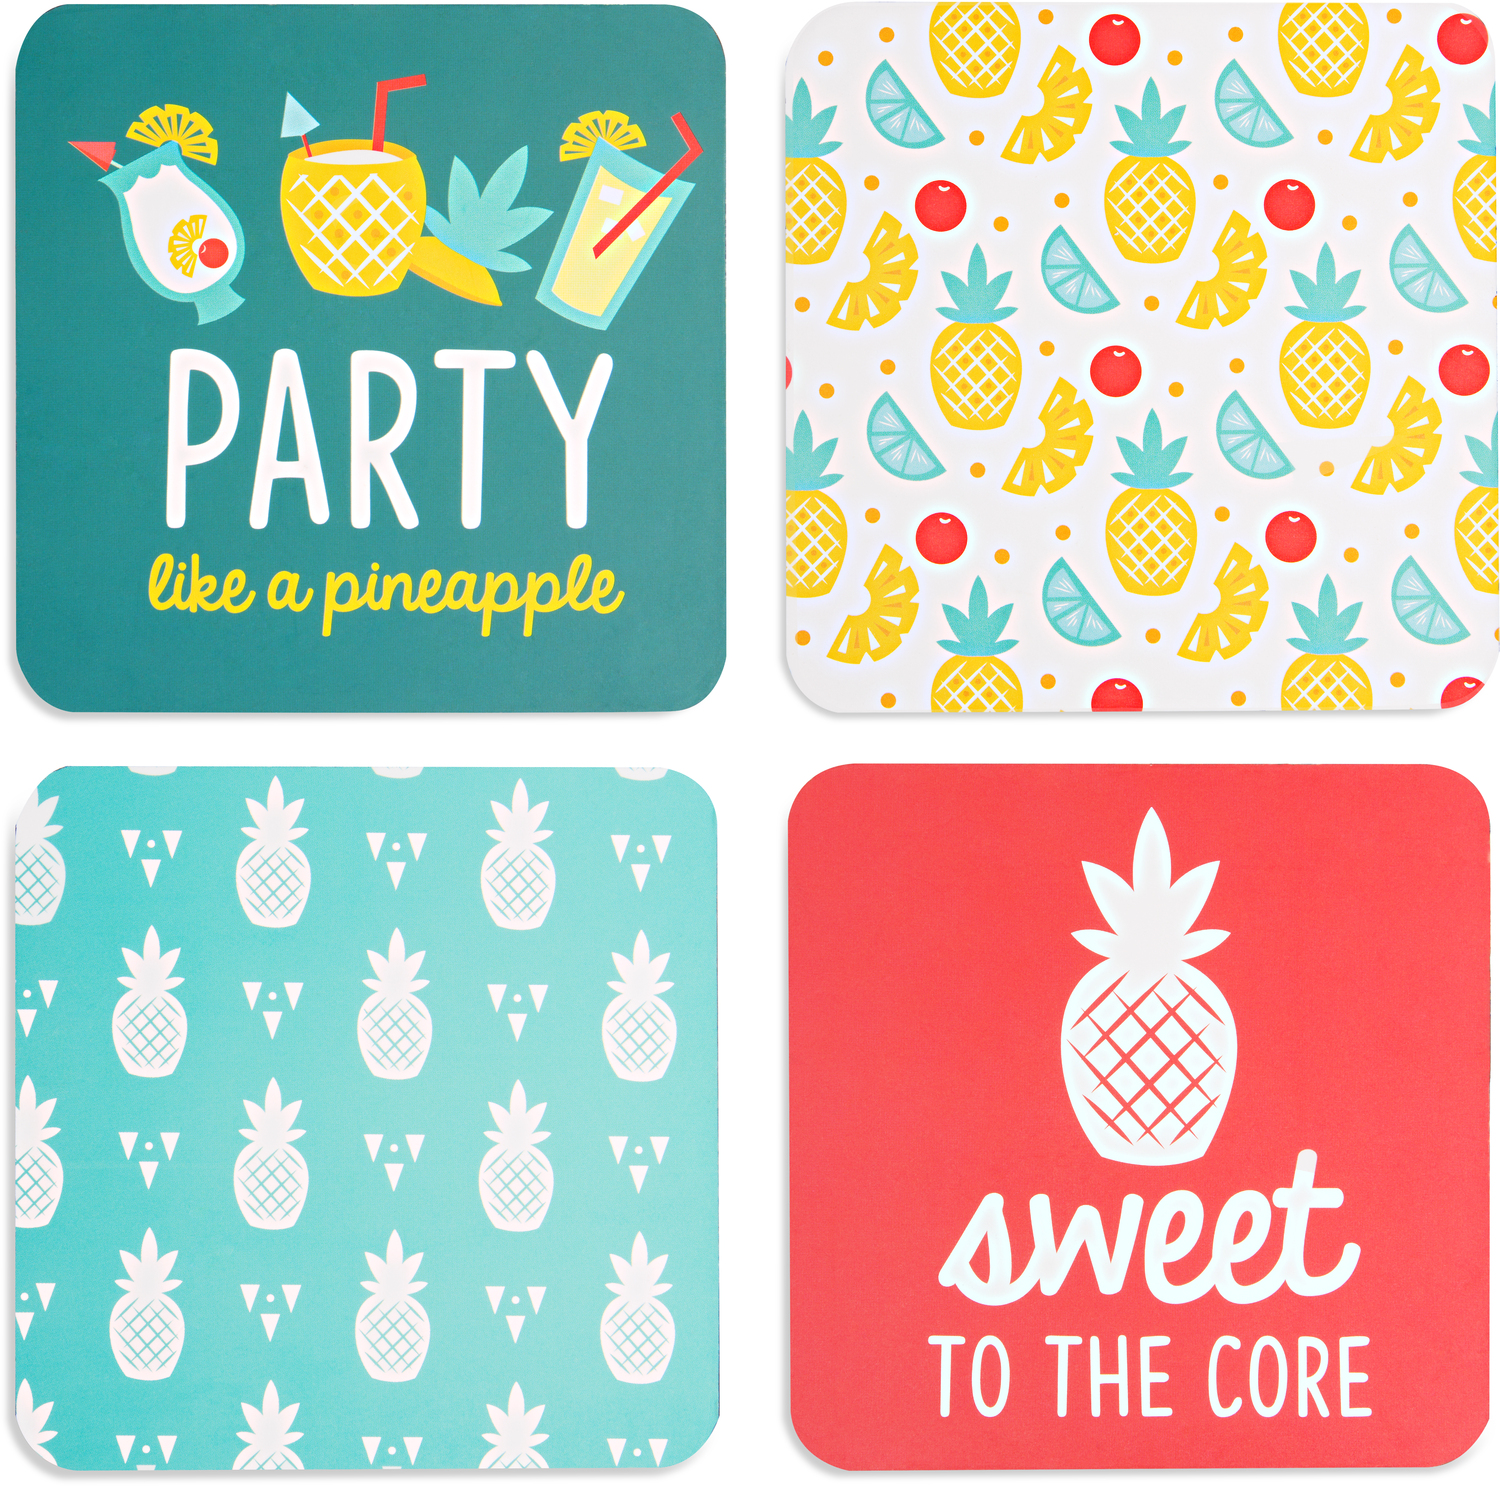 Pineapple Punch by Livin' on the Wedge - Pineapple Punch - 4" (4 Piece) Coaster Set with Box